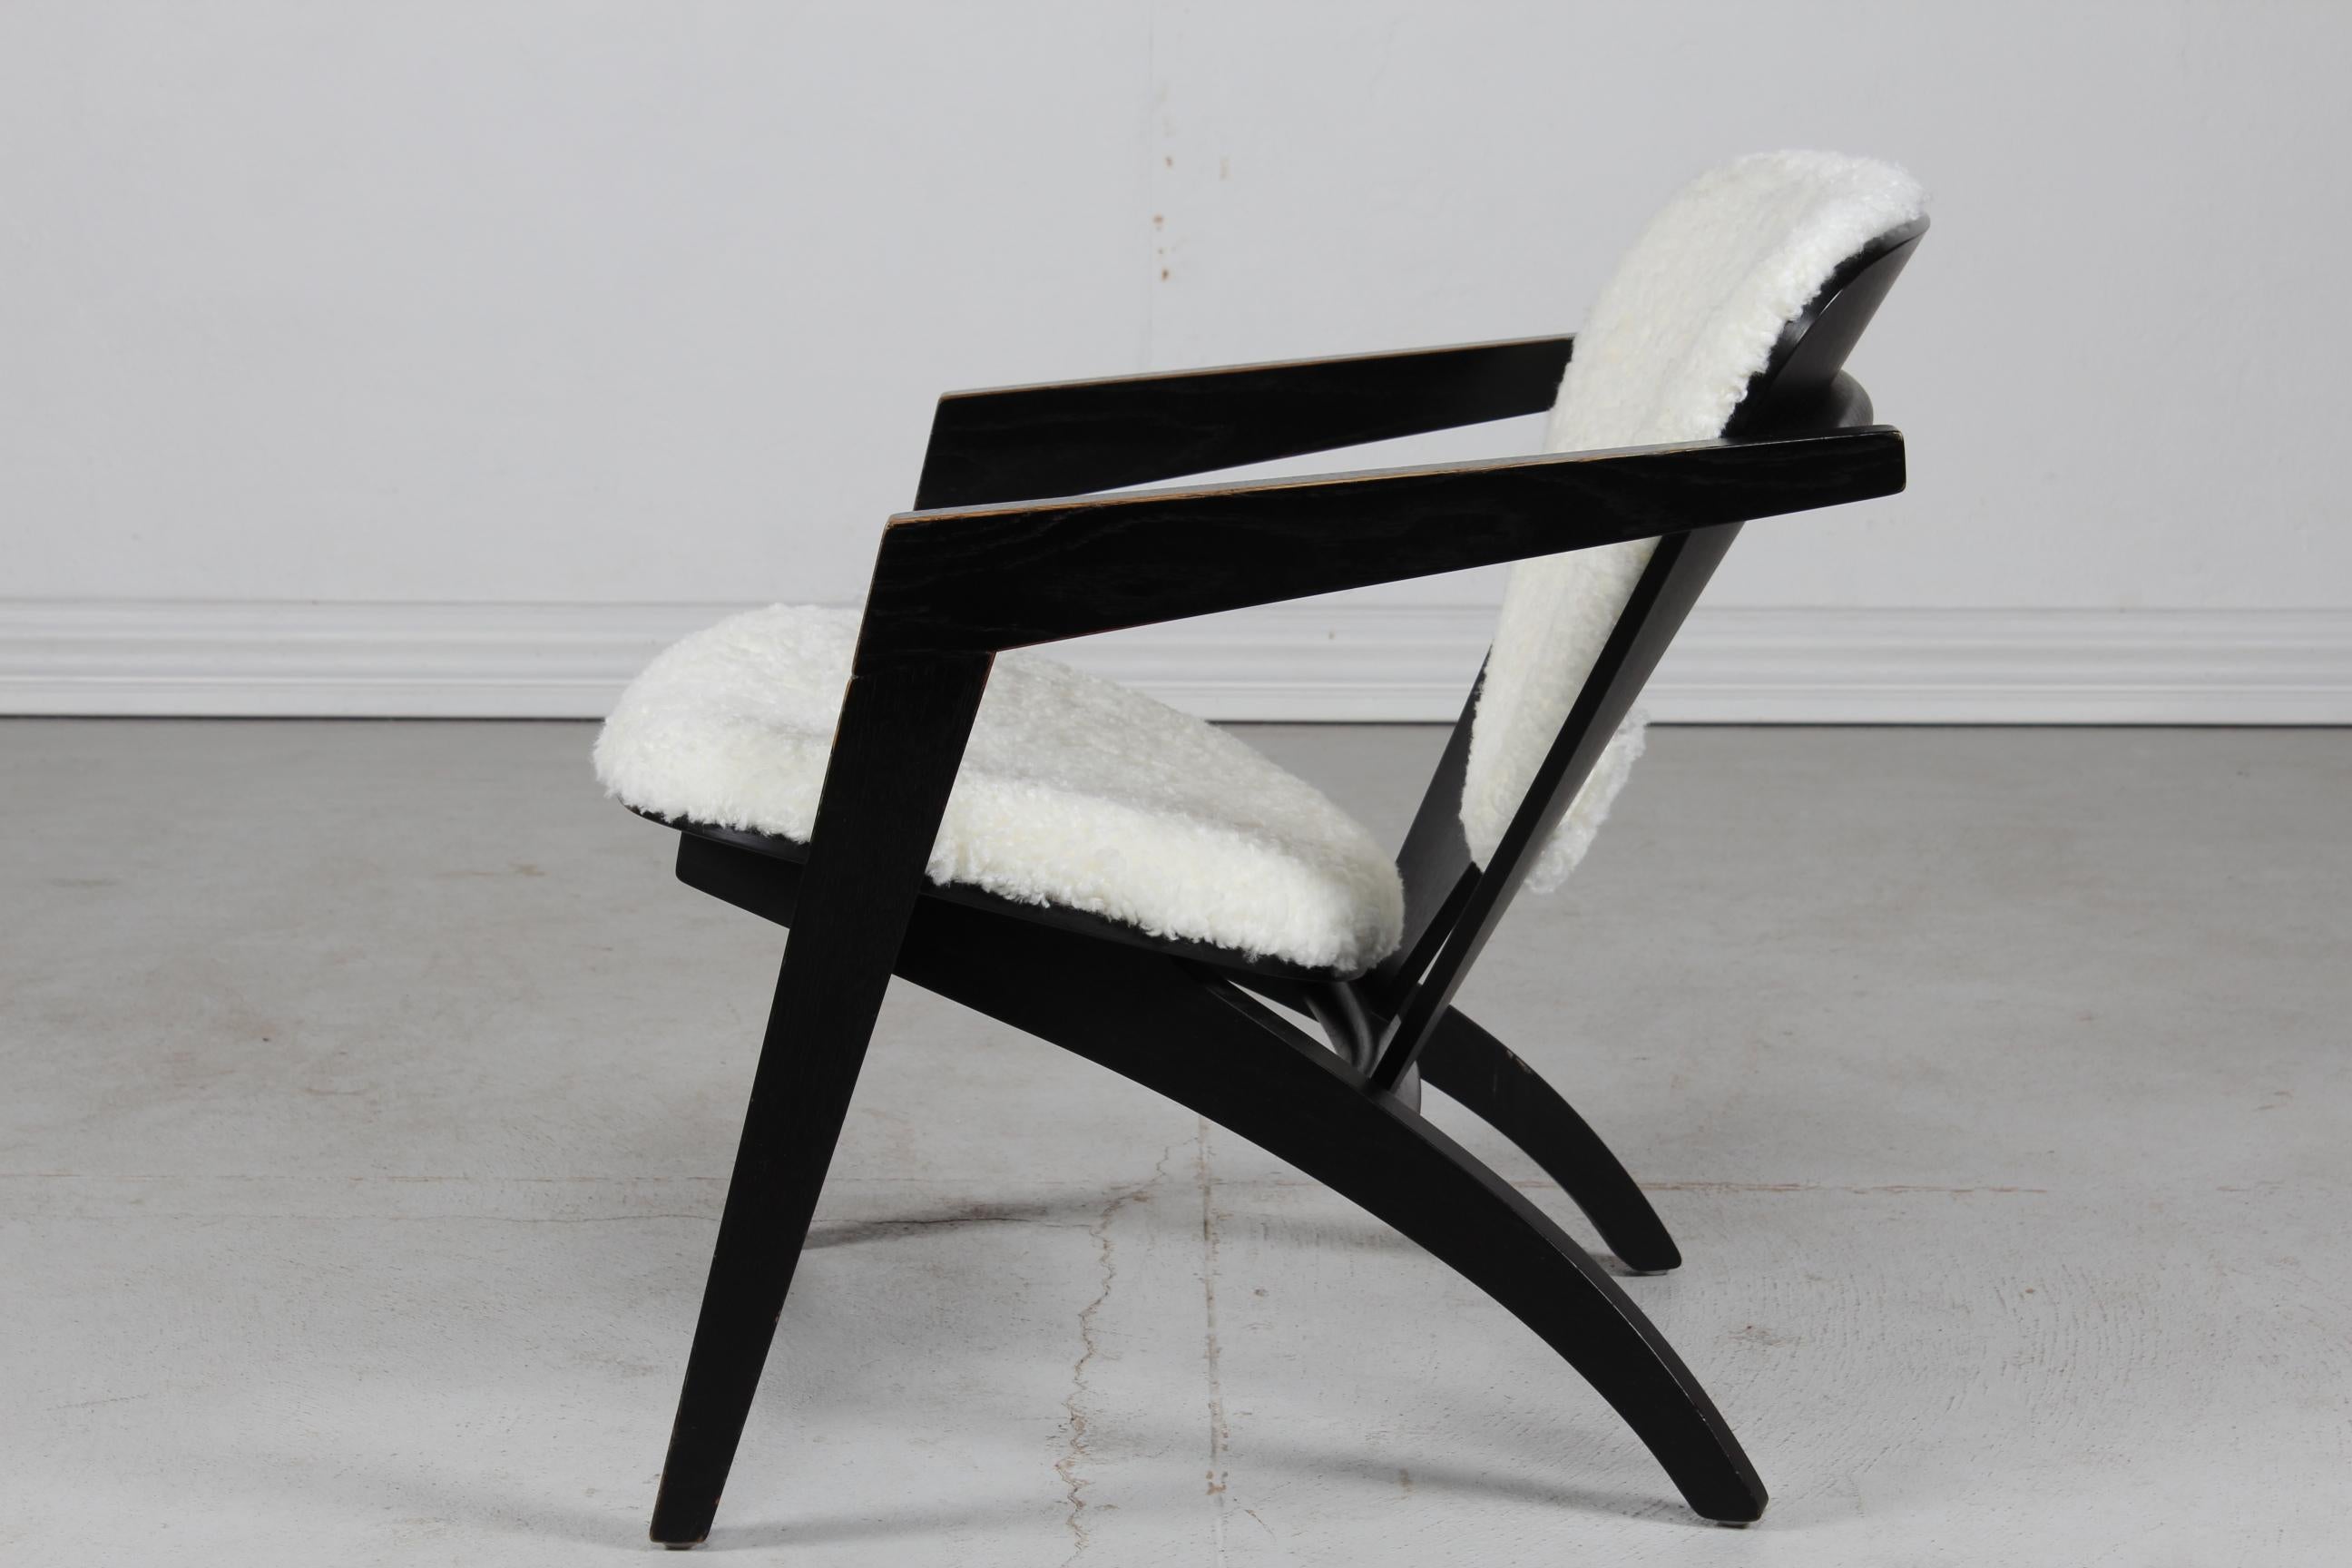 Butterfly easy chair model GE 460 by the danish designer Hans J. Wegner (1914-2007) in 1977.
This chair is made by Getama A/S in the 1990s.

The butterfly chair is made of solid and veneer black stained oak upholstery with new off white